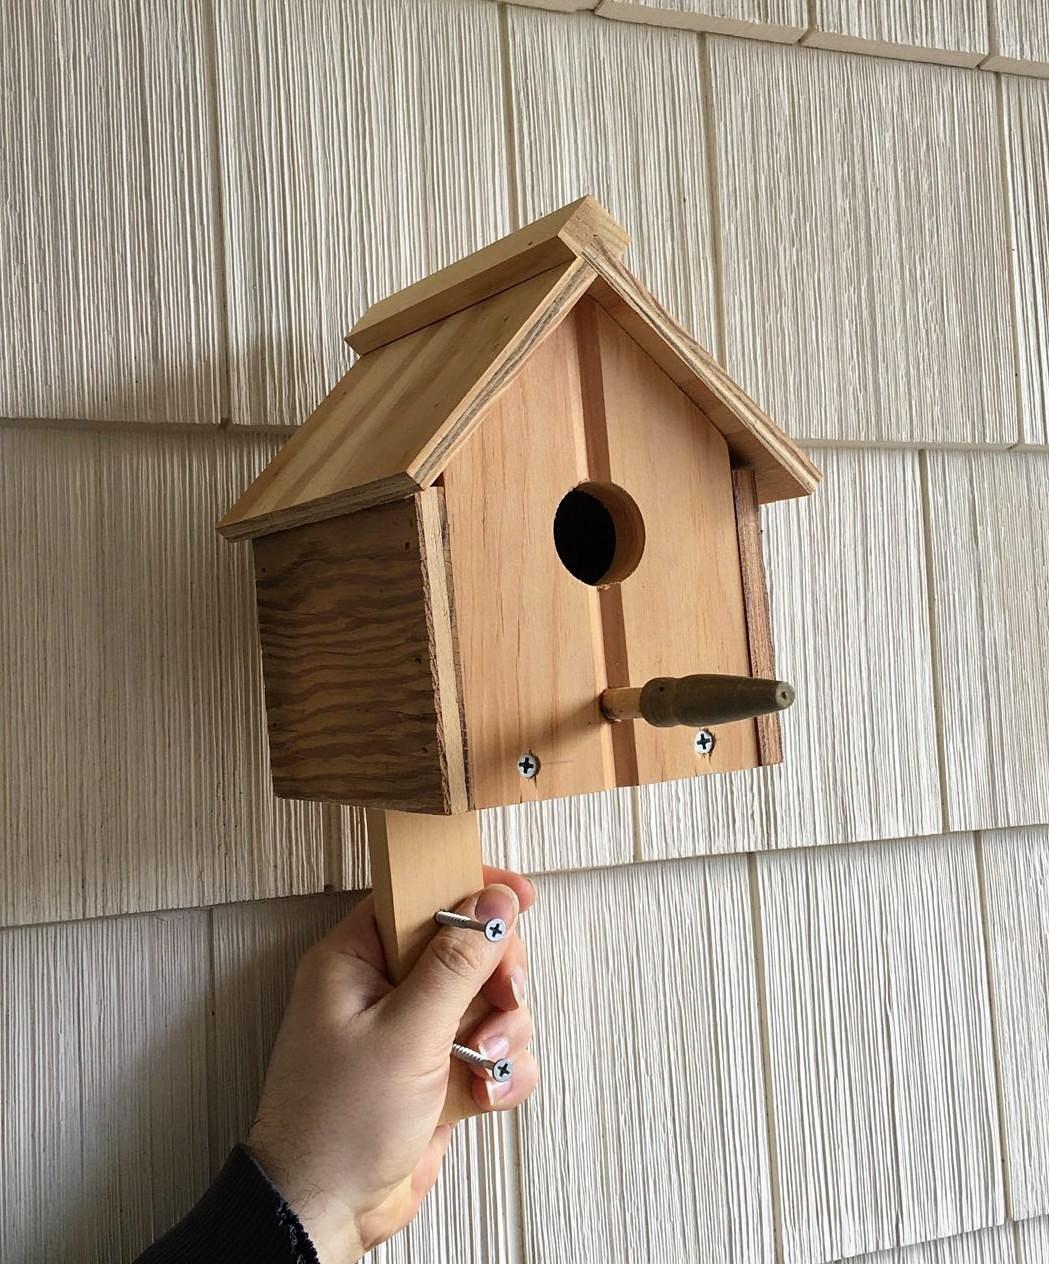 Mother's Day Birdhouse Building at Orchard Ridge Farm